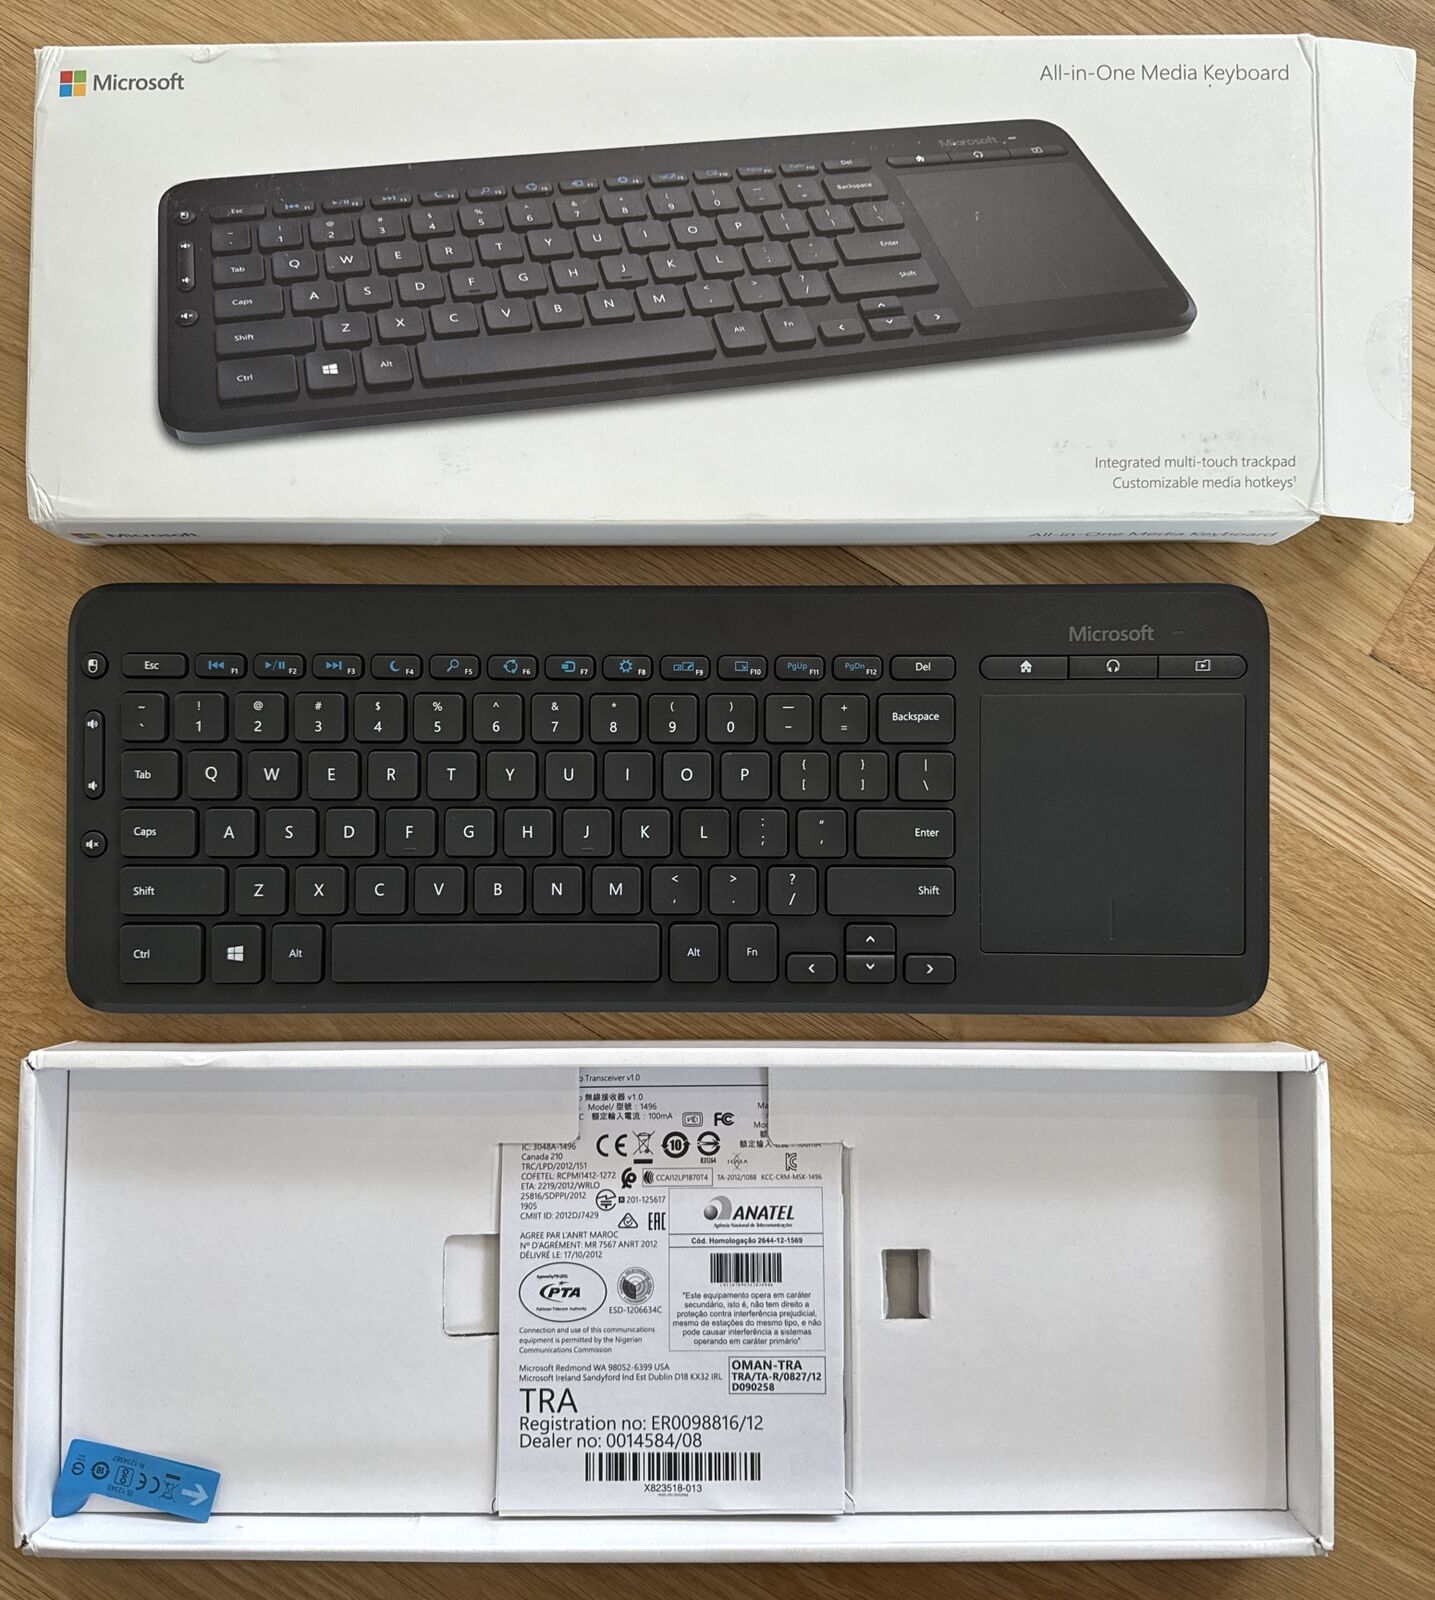 Microsoft All-in-One Media Keyboard - Brand New, Unused - NO USB TRANSCEIVER